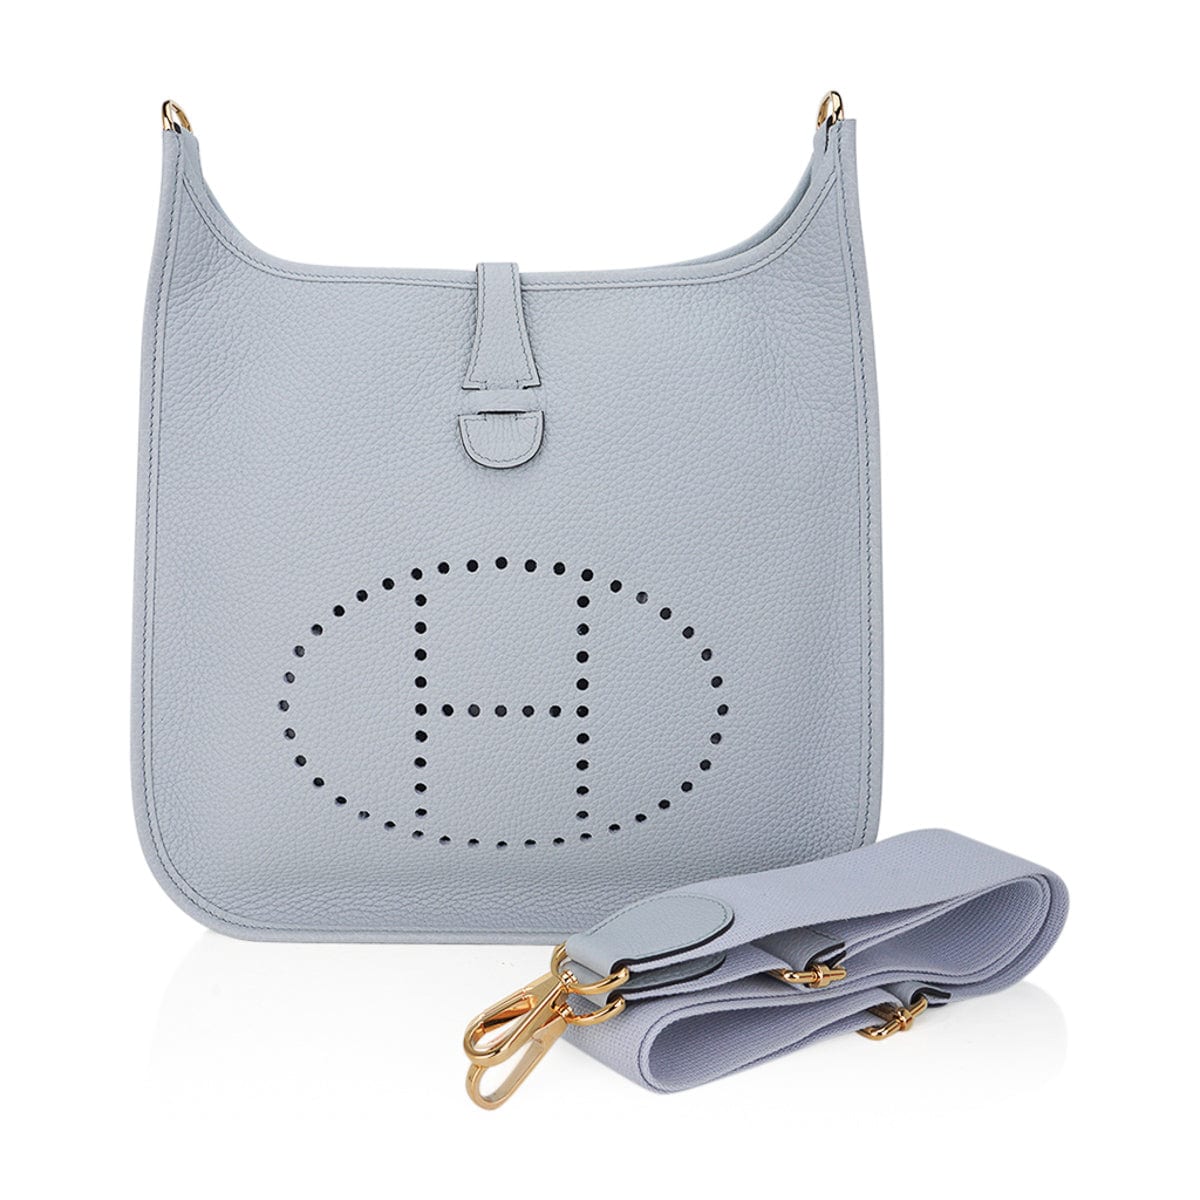 Hermes Evelyne PM Bag Blue Pale Clemence Leather with Gold Hardware